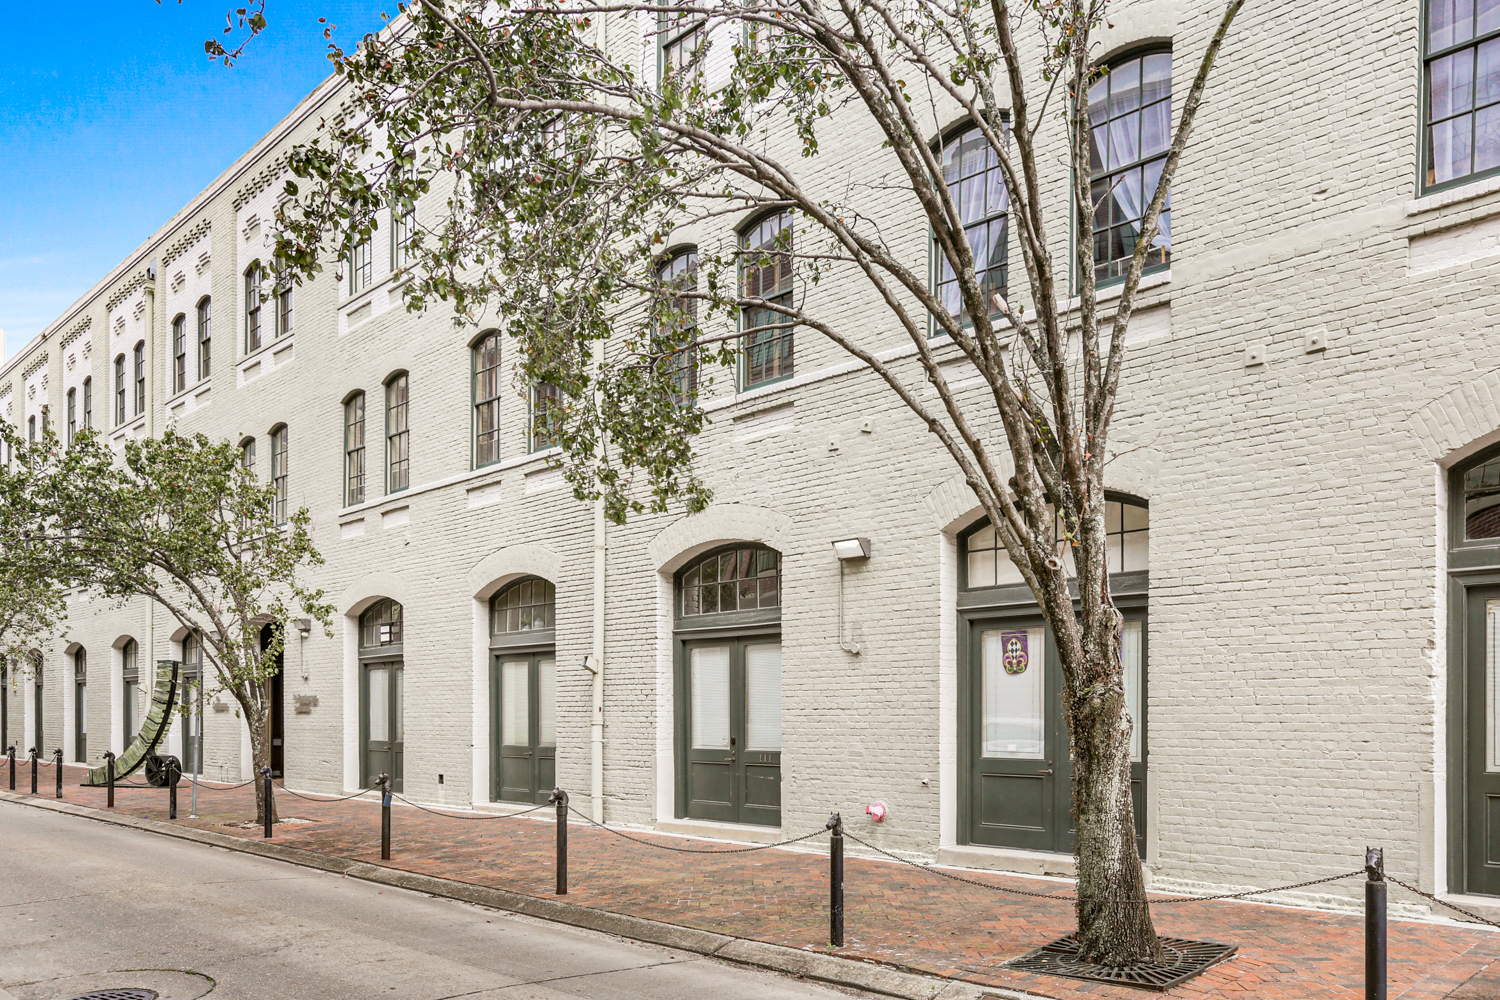 Great condo in the heart of the warehouse district. High 15 foot ceilings. Loft style bedroom upstairs.2nd bedroom is set up as an office. Parking one block away in a garage. Walk to many restaurants and shops! 